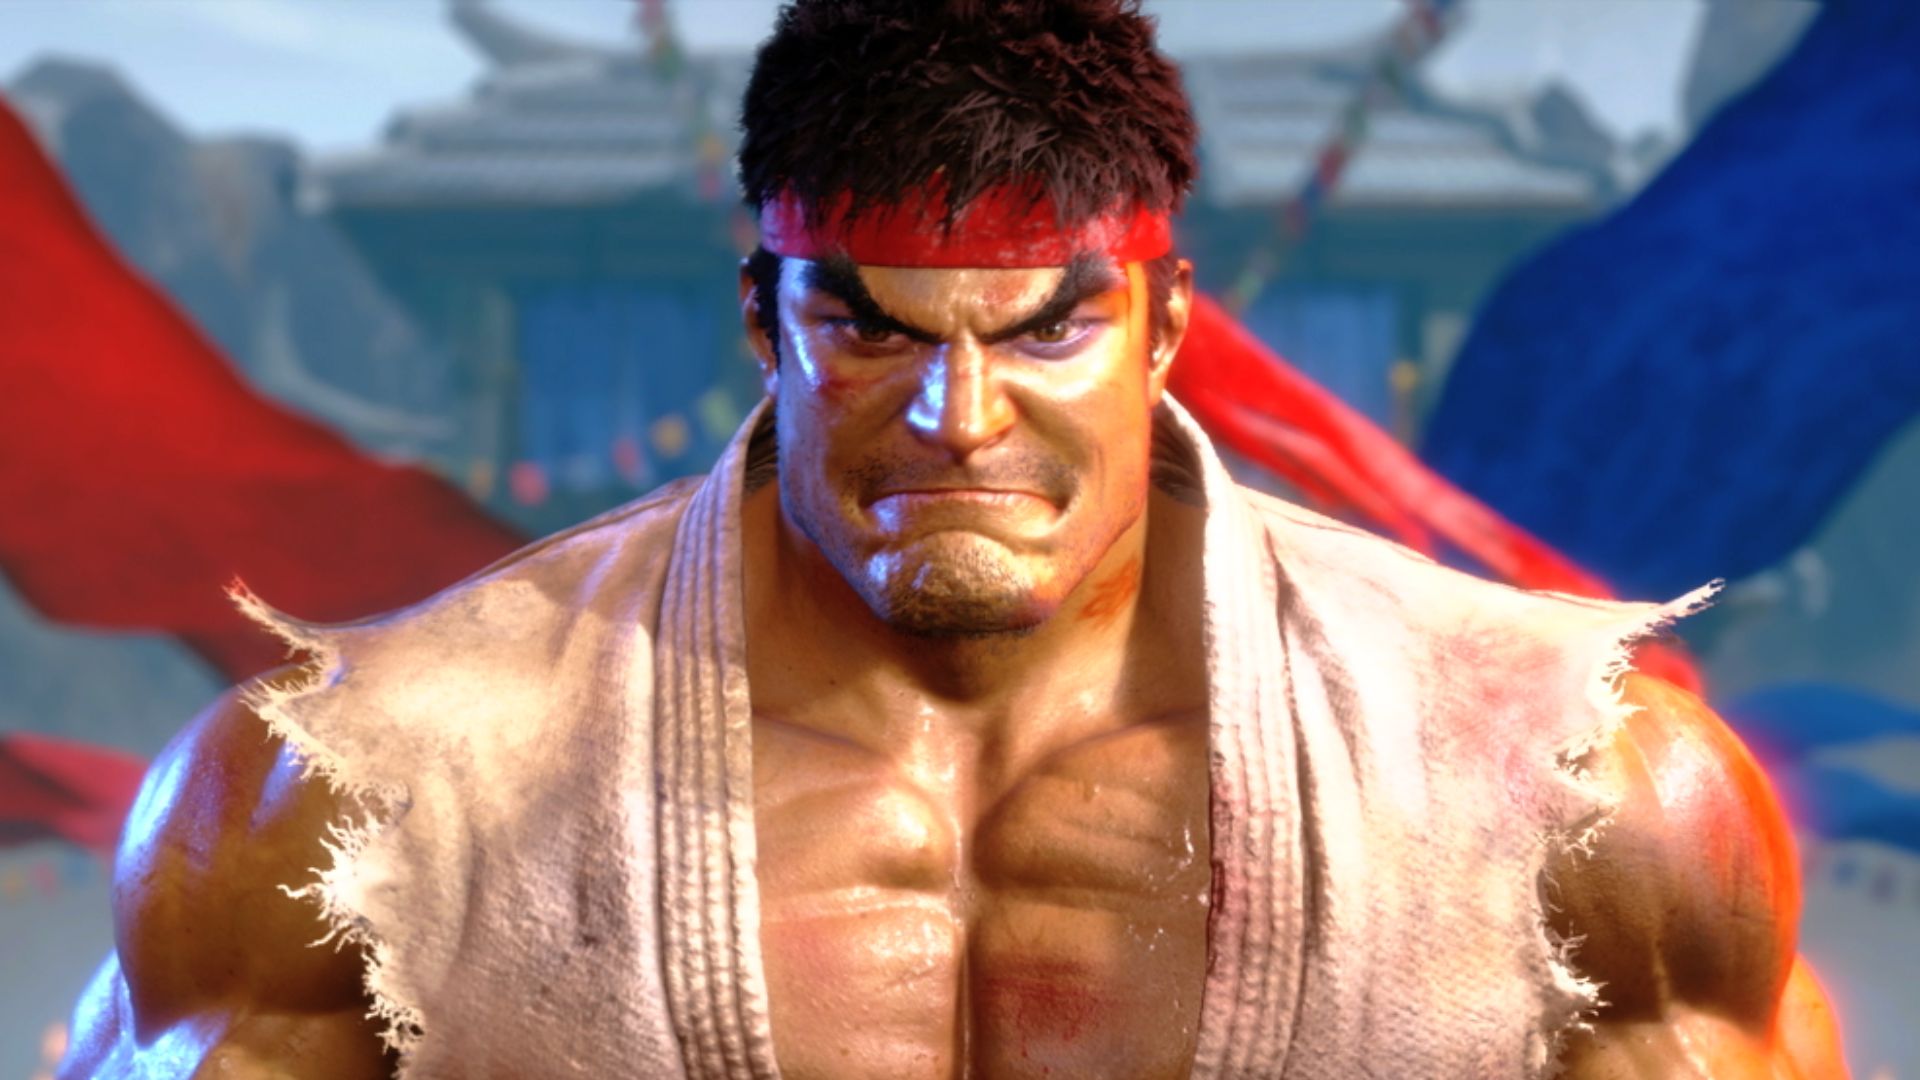 Street Fighter 6 wants to teach “the fun of fighting games”